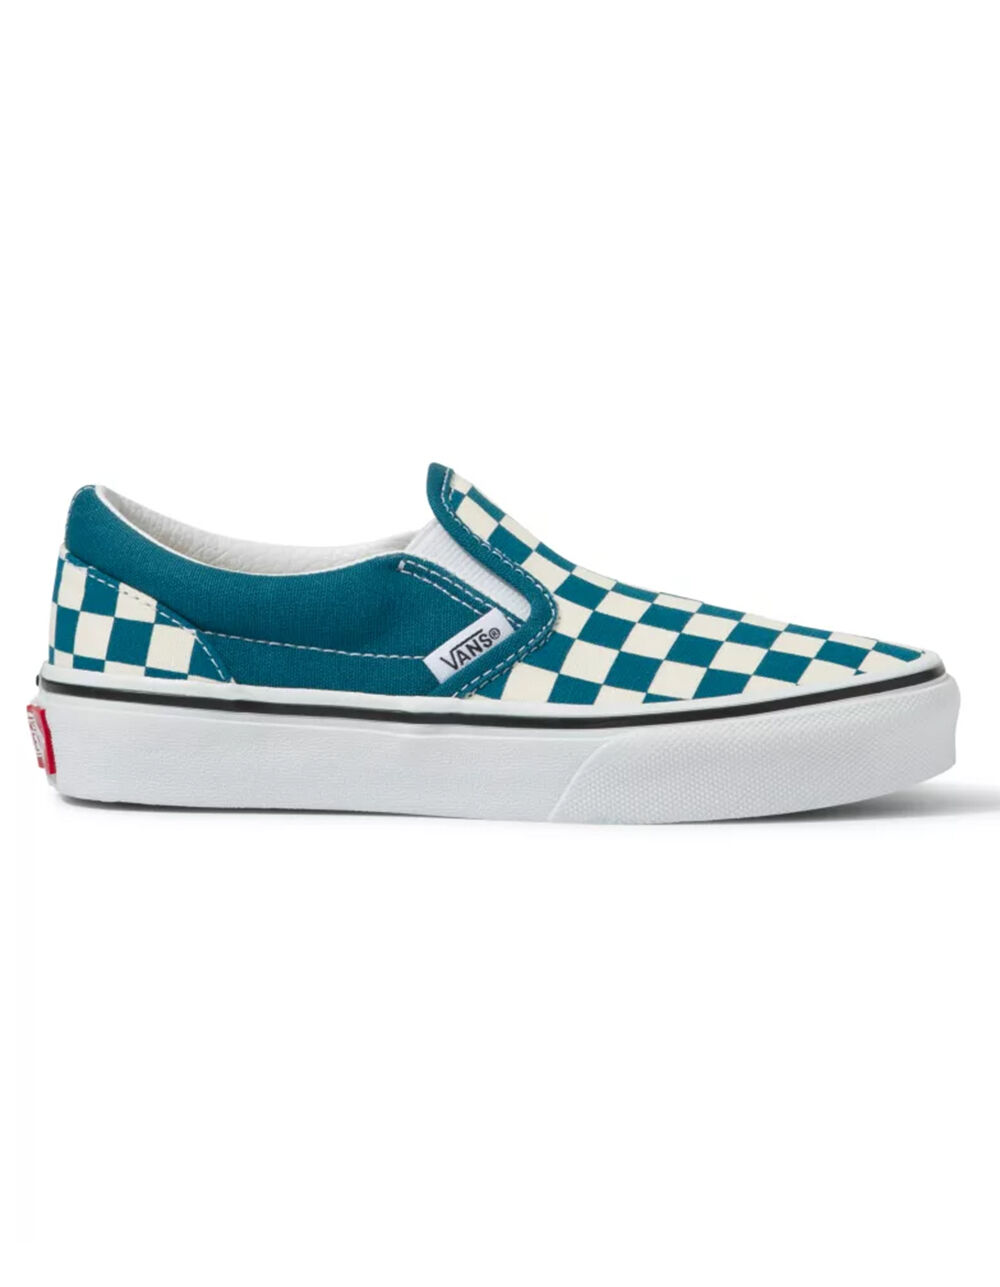 VANS Checkerboard Classic Juniors Slip On Shoes - CHECK | Tillys